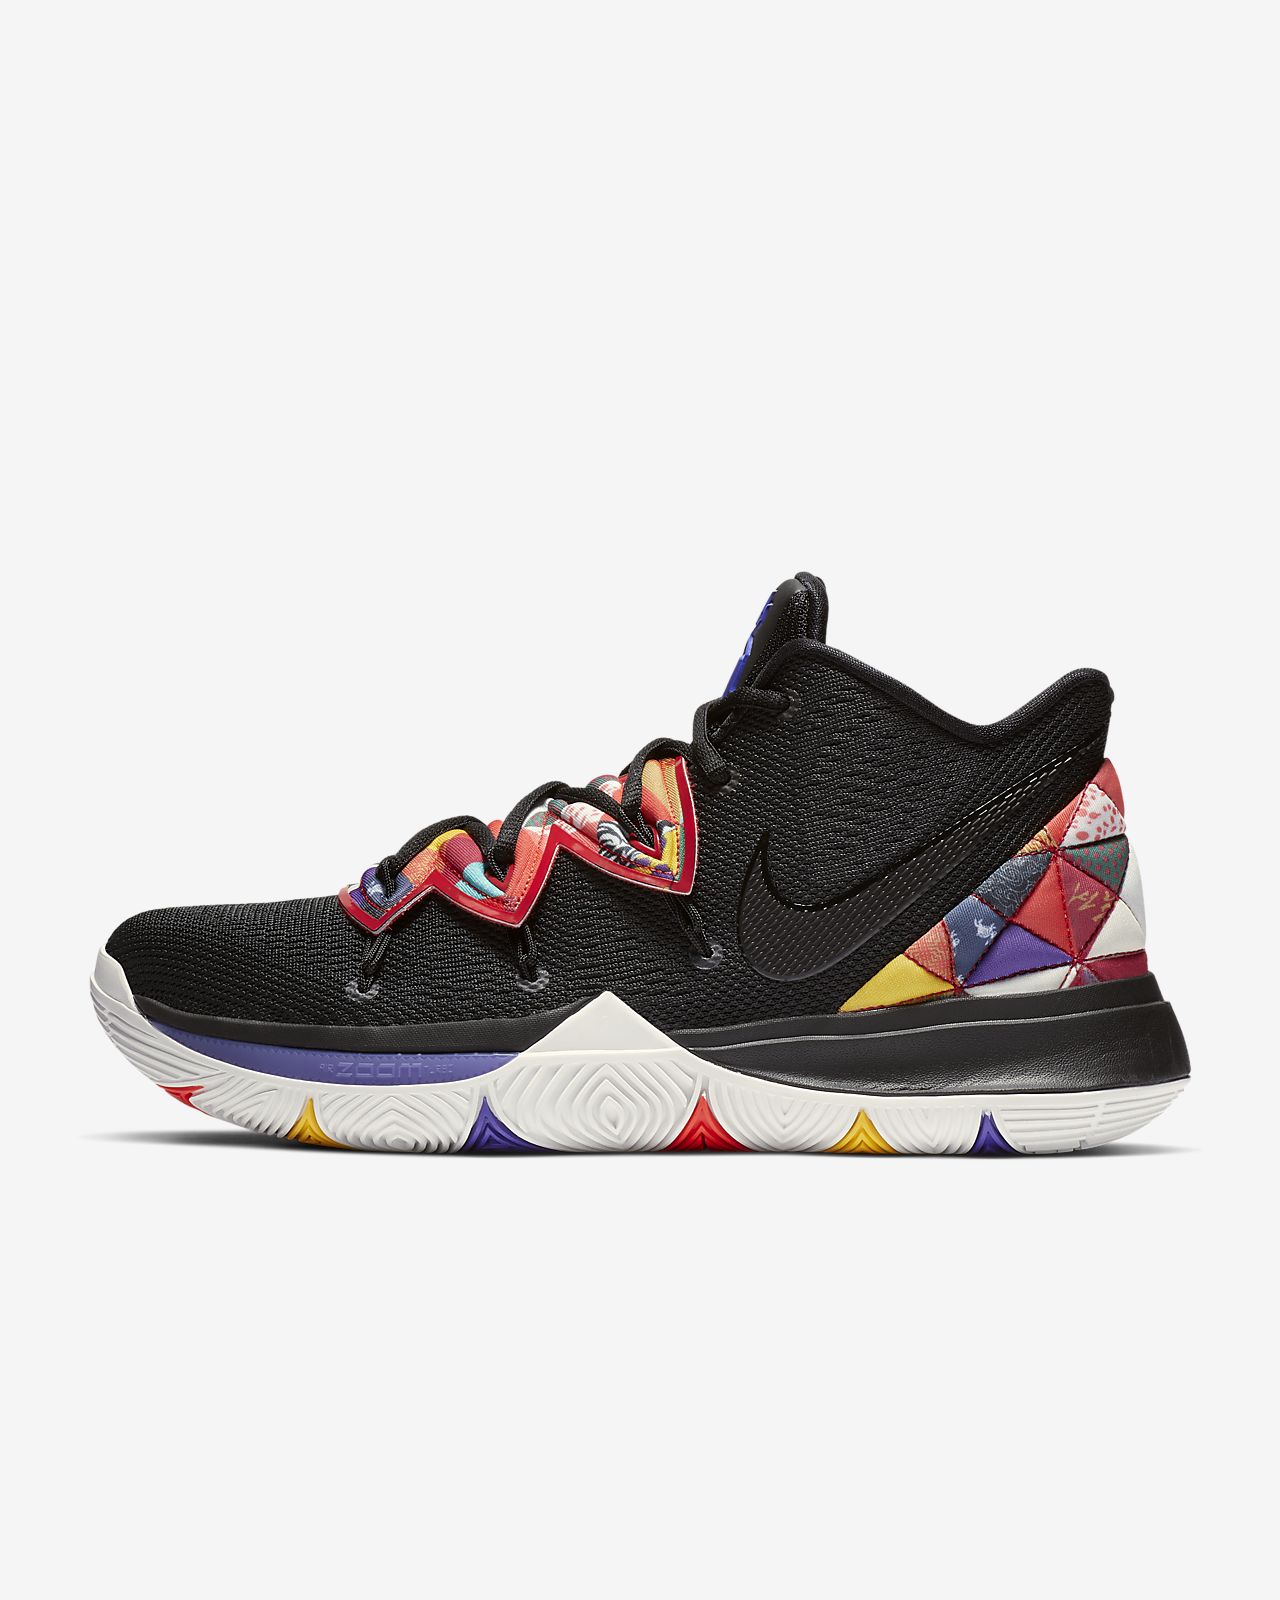 kyrie 5 traction